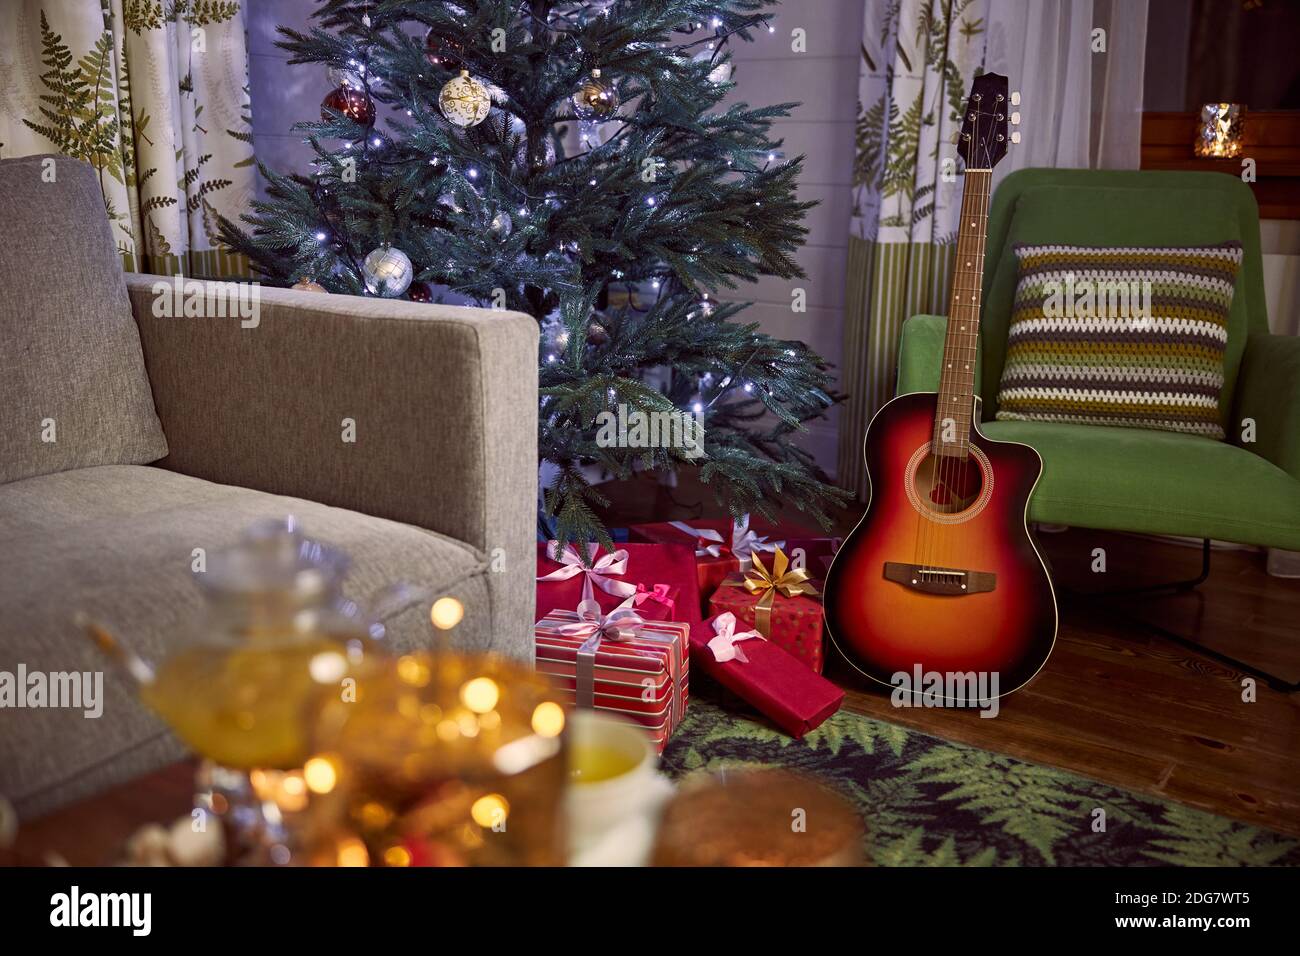 Guitar with decorated Christmas Tree in the background Stock Photo